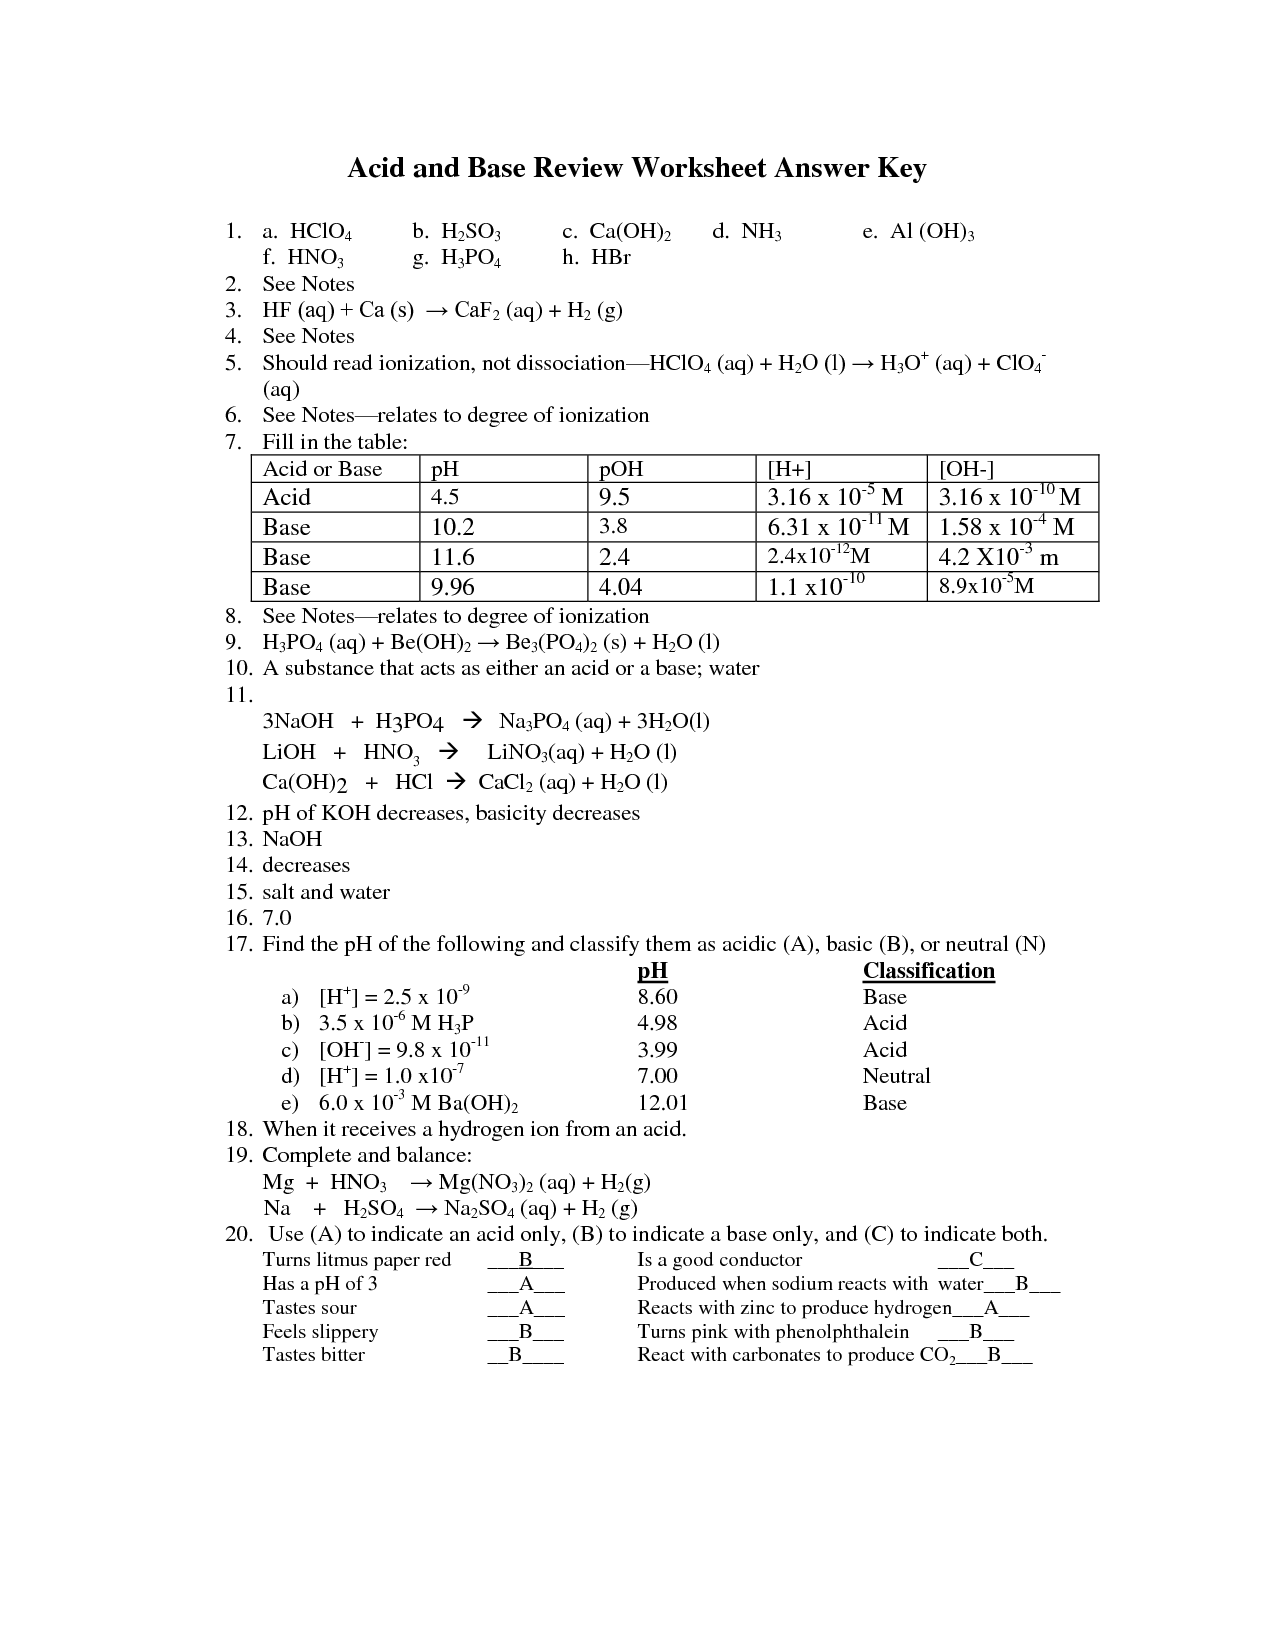 acid-and-bases-worksheet-answers